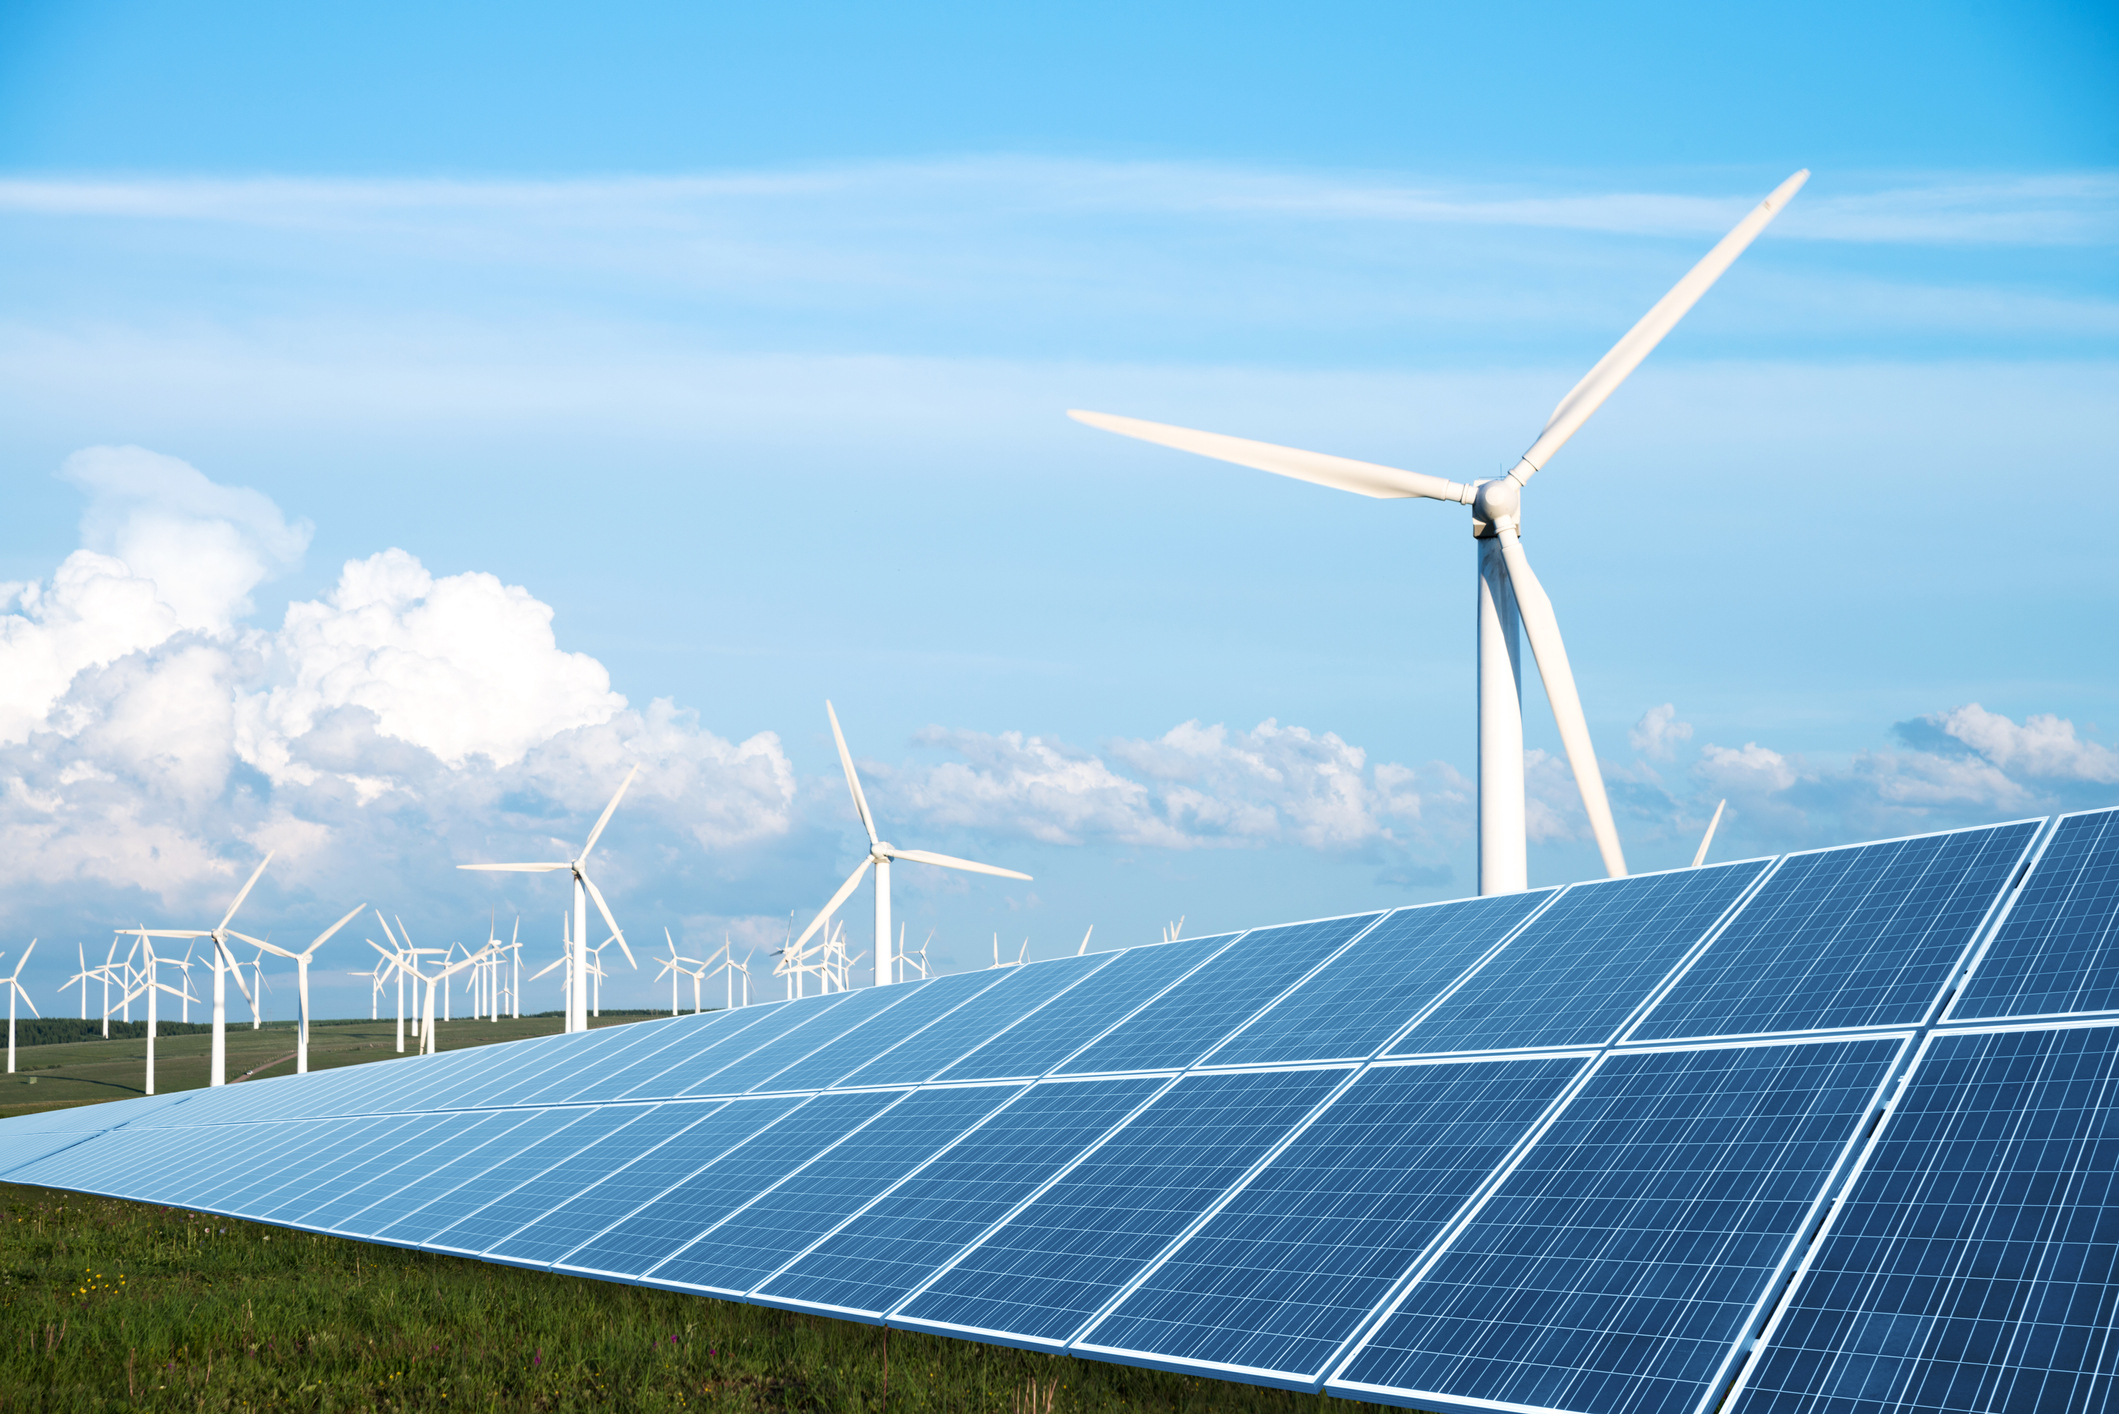 CleanChoice Energy supplies 100% renewable energy from wind and solar.